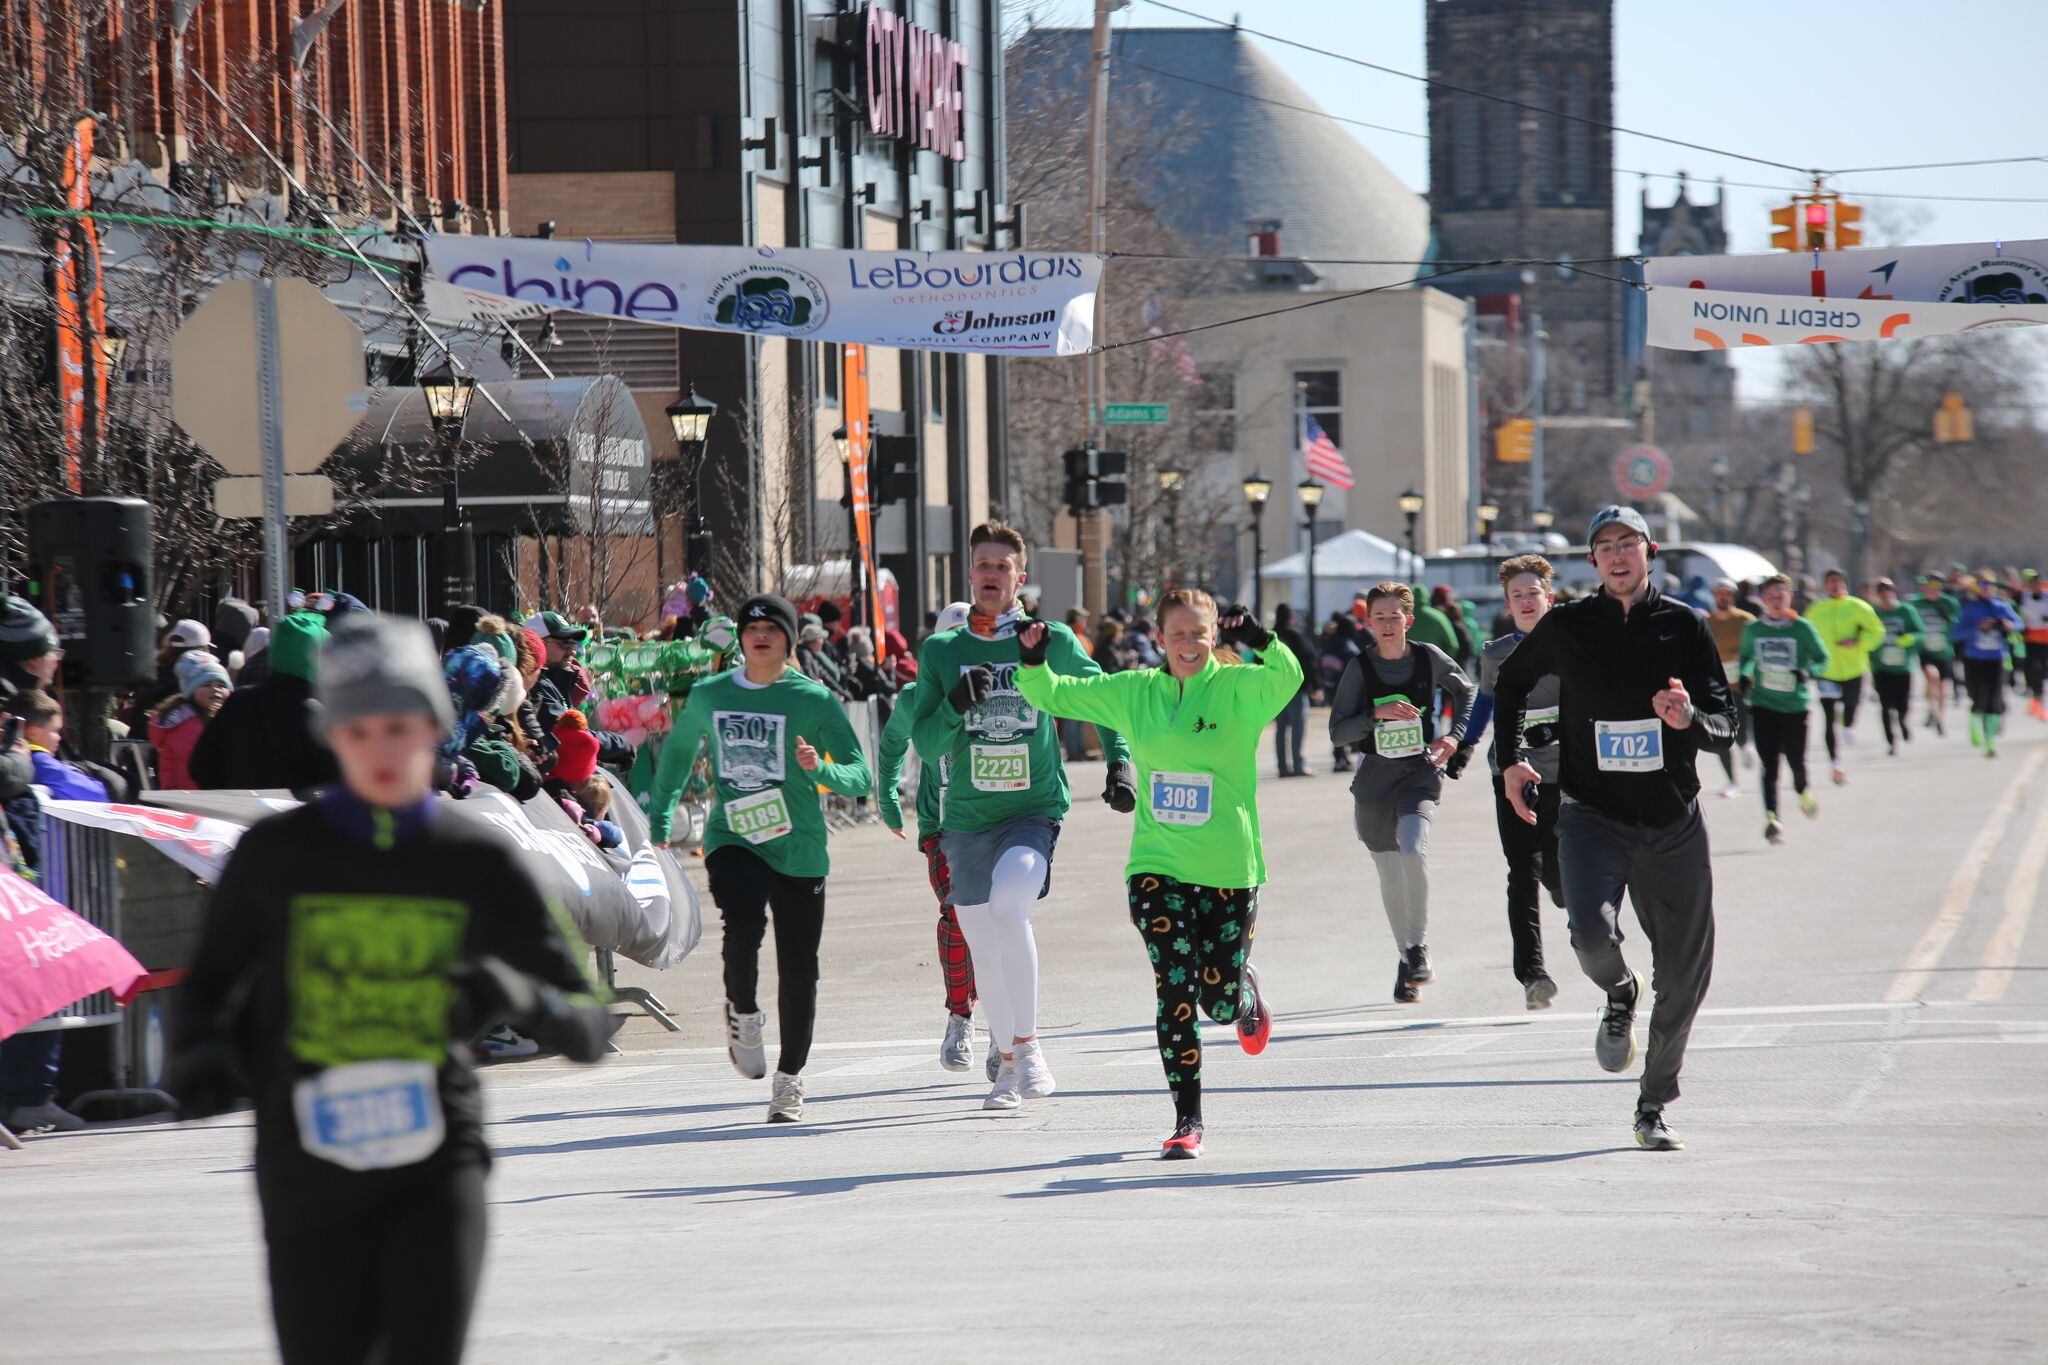 PHOTOS Thousands Participate in Bay City St. Patrick's Day 5K race